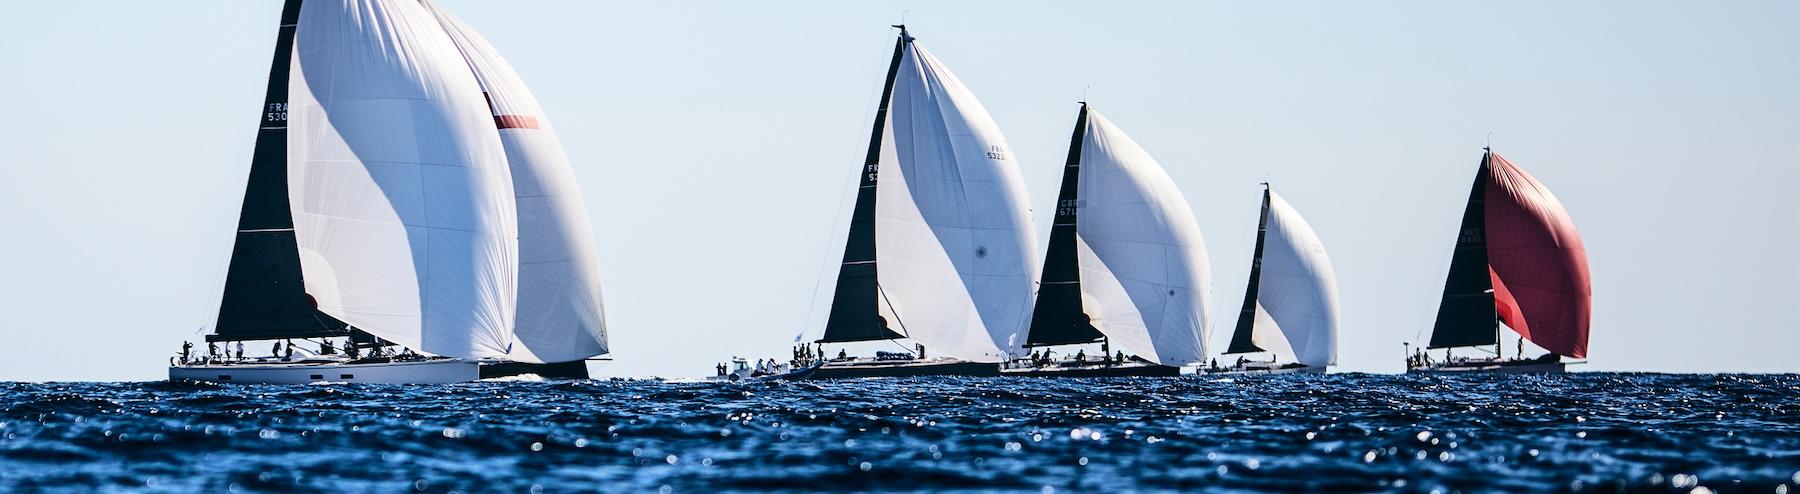 Organised by the Royal Ocean Racing Club, in association with the International Maxi Association and Yacht Club de France, the 10th edition of the RORC Transatlantic Race started in superb conditions outside Calero Marinas Marina Lanzarote on Sunday 7th January, 2024.